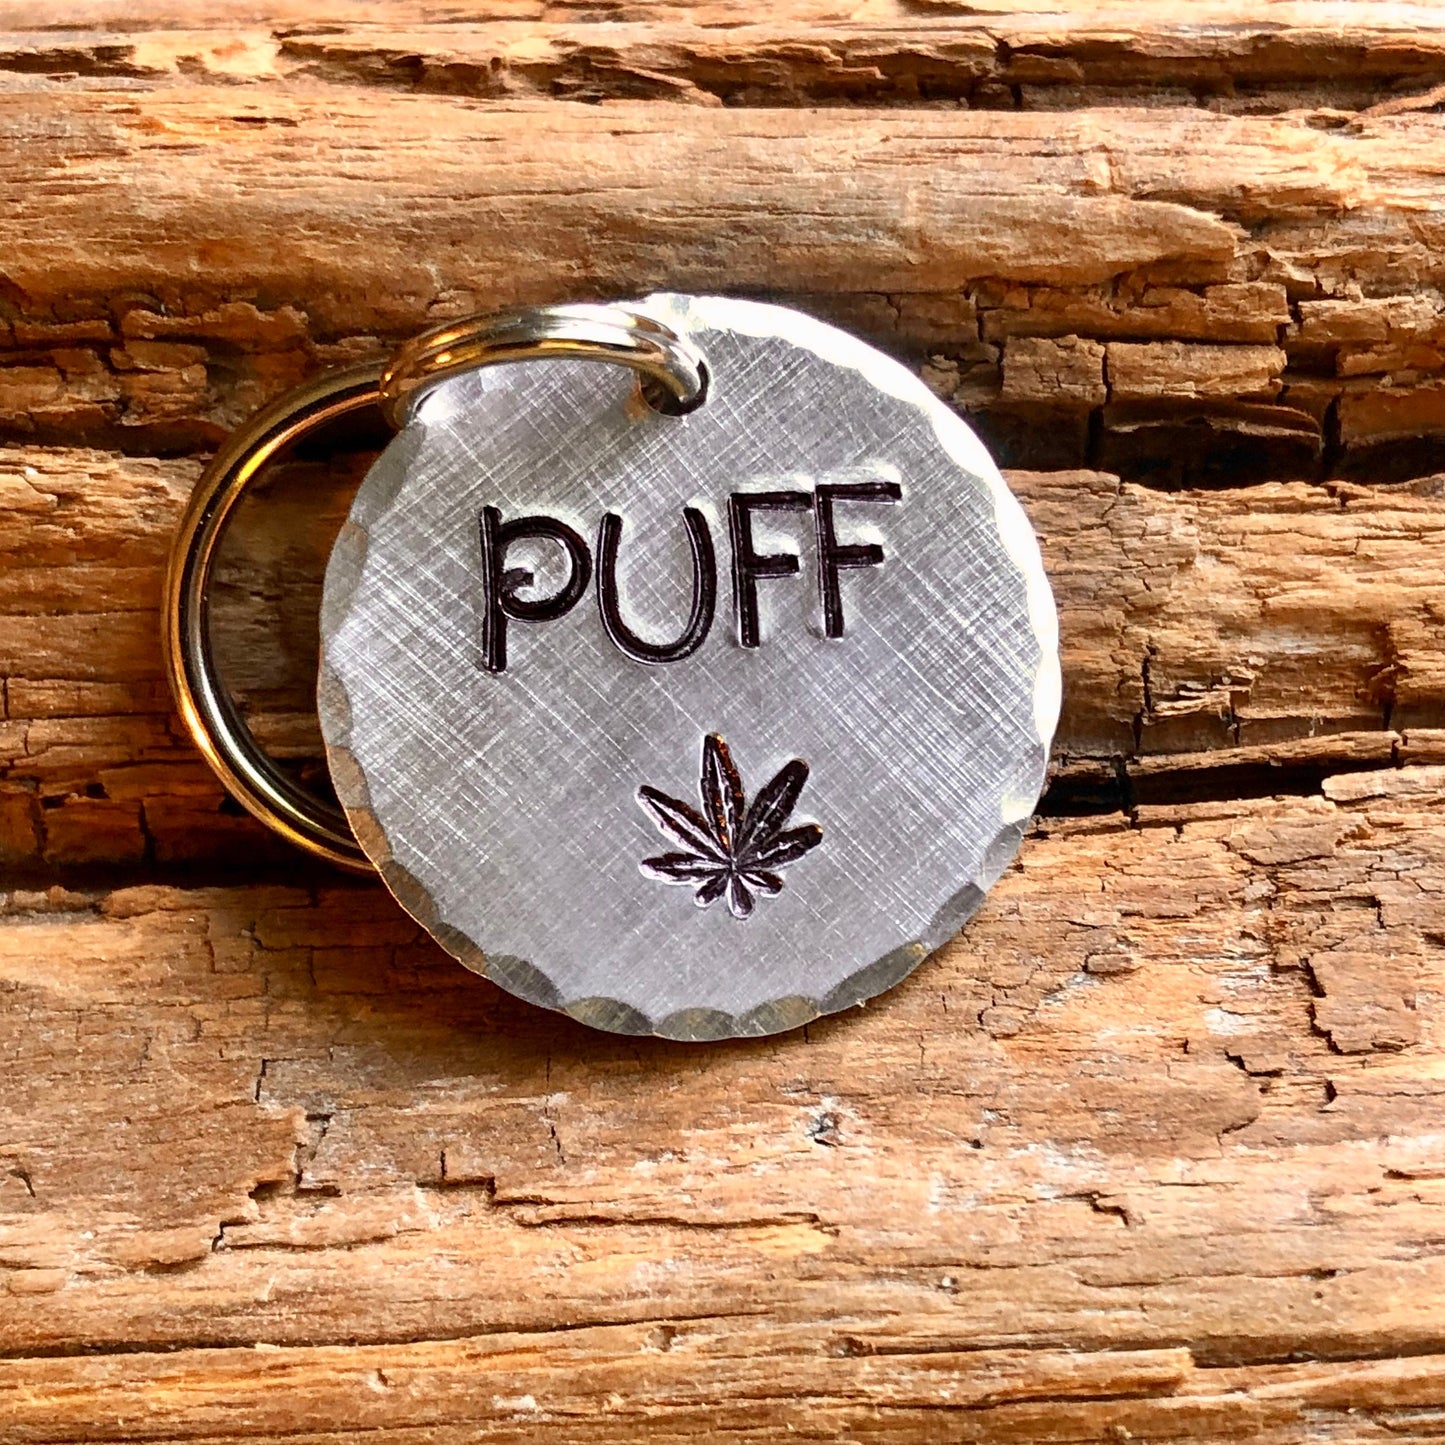 Cannabis Pet ID Tag, Dog Tag with Weed, Personalized Dog Tag with Pot Plant, Hemp Pet Tag, 2 Sizes